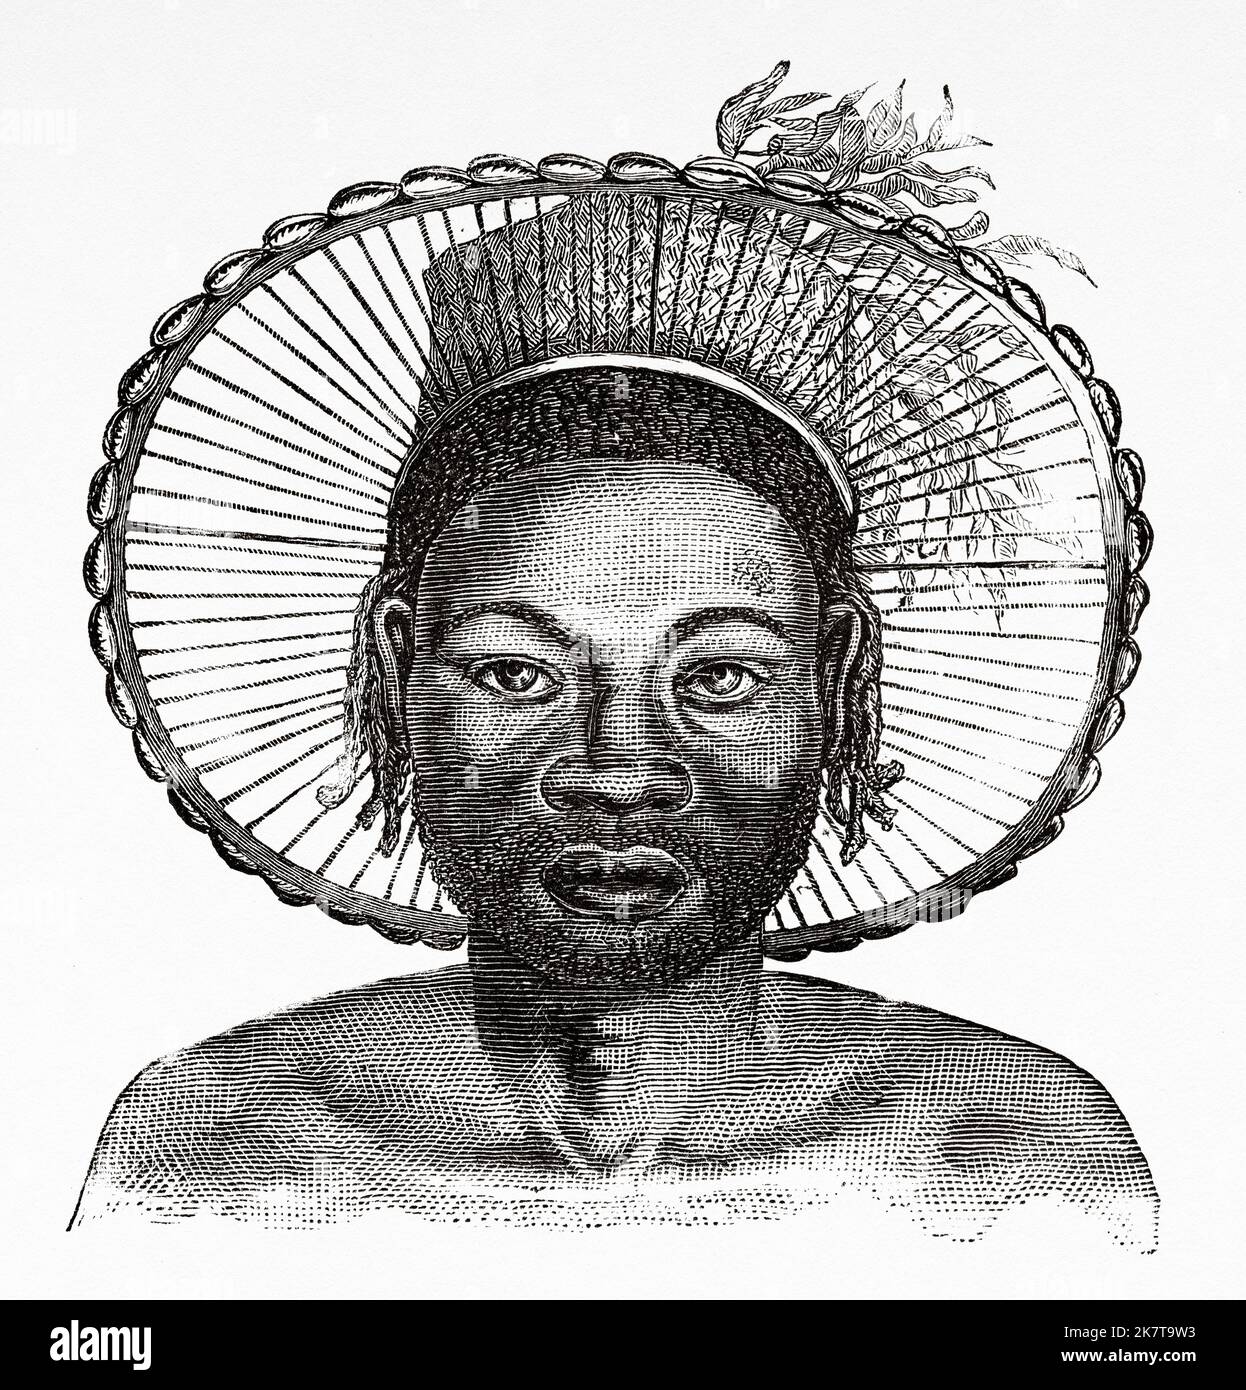 Zande woman's hairstyle, Democratic Republic of the Congo. Africa. Heart of Africa Three years travels and adventures in the unexplored regions of Central Africa by Georg August Schweinfurth, 1868-1871 Stock Photo